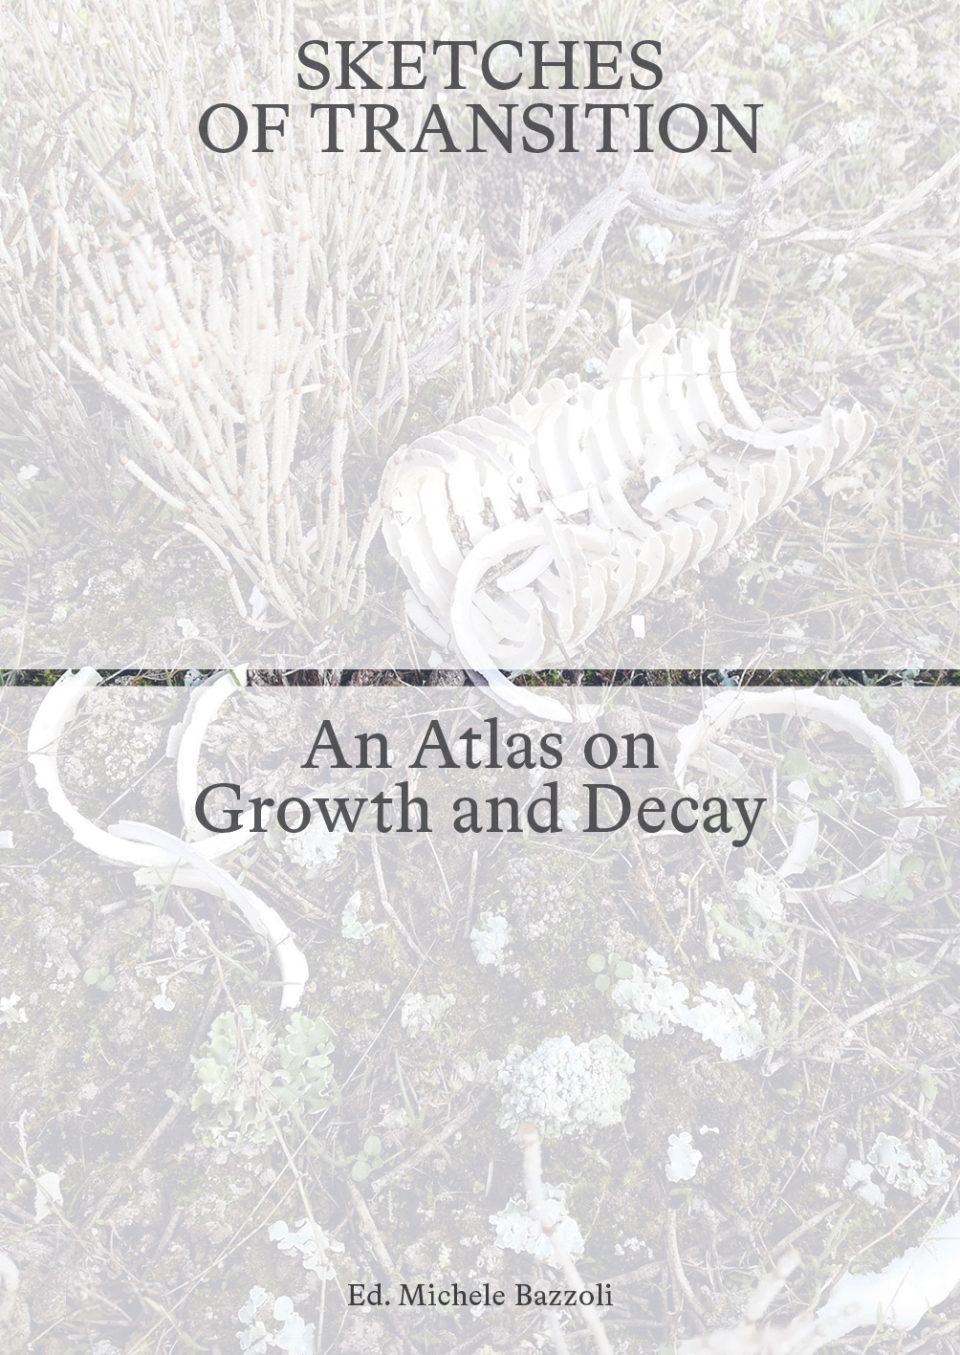 Sketches of Transition / An atlas of growth and decay